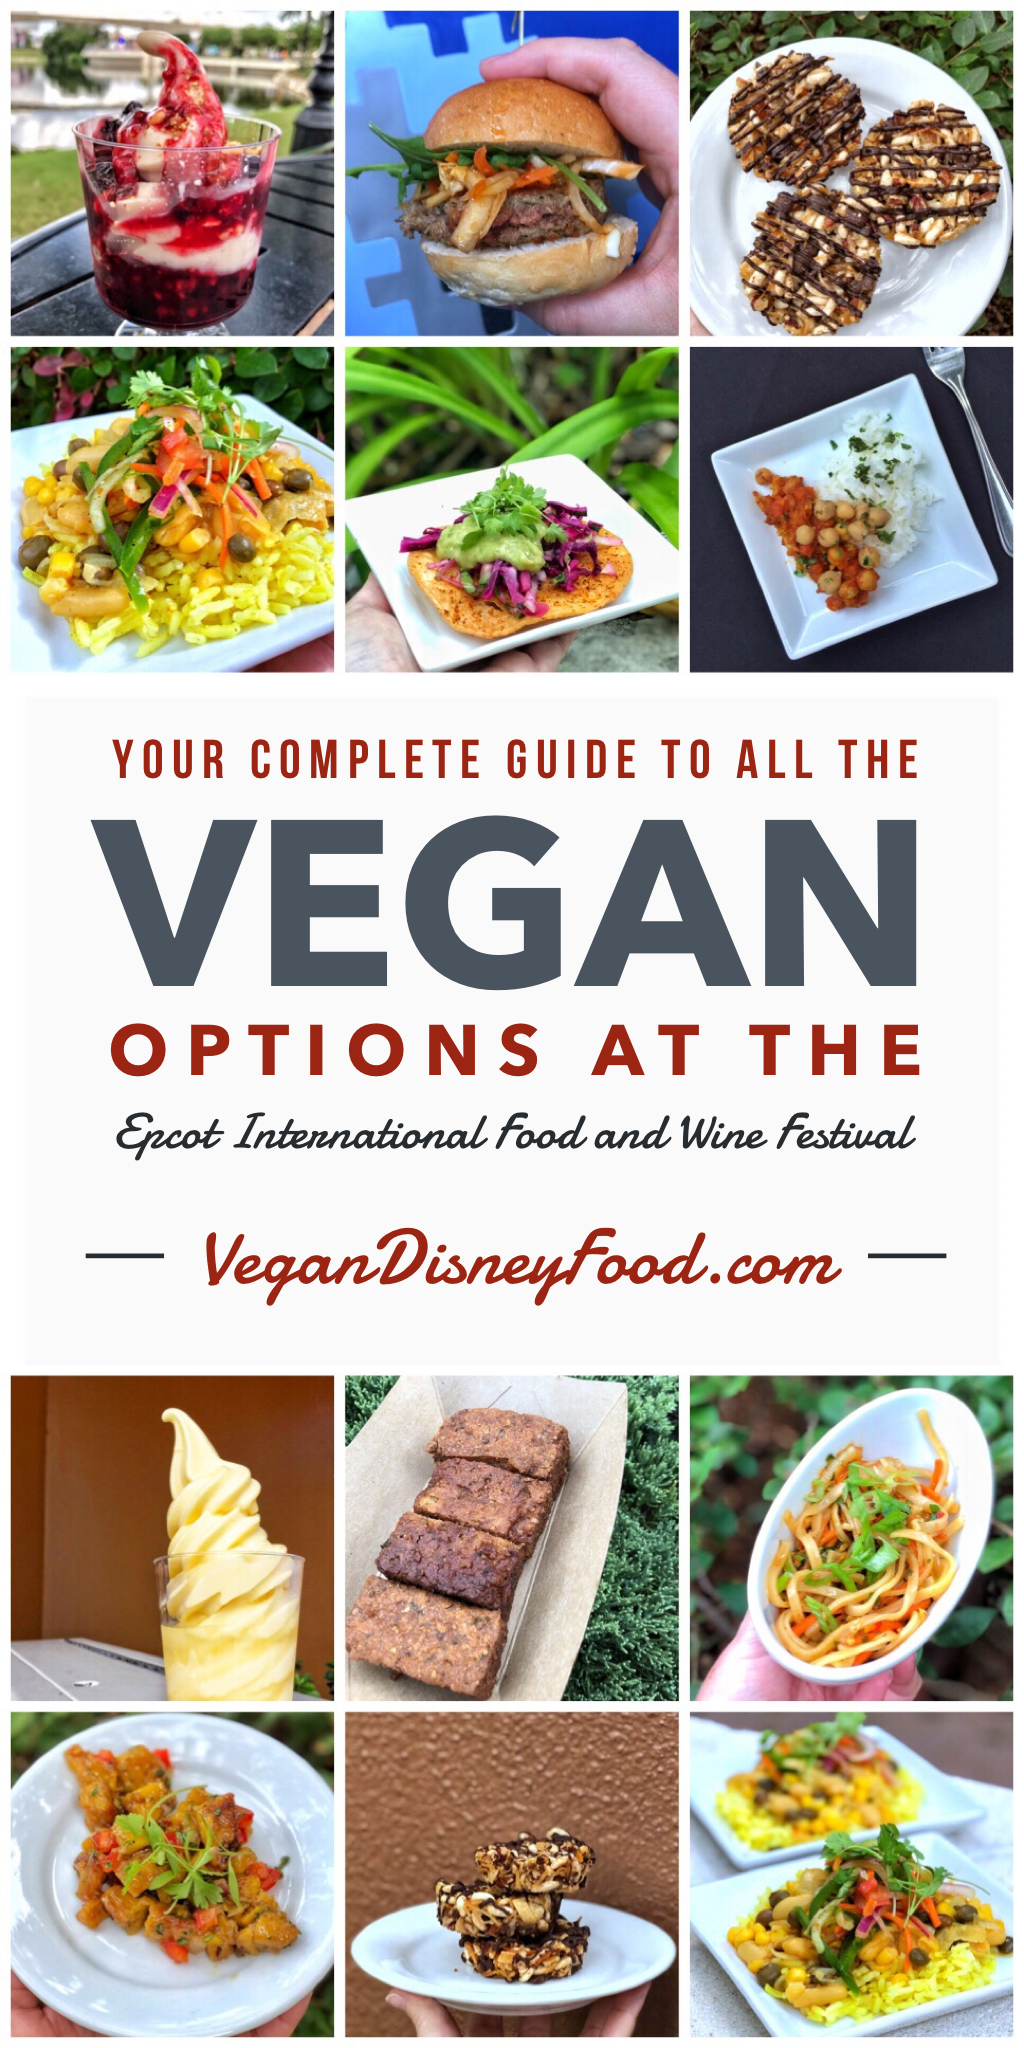 Your Complete Guide to All the Vegan Options at the Epcot International Food and Wine Festival